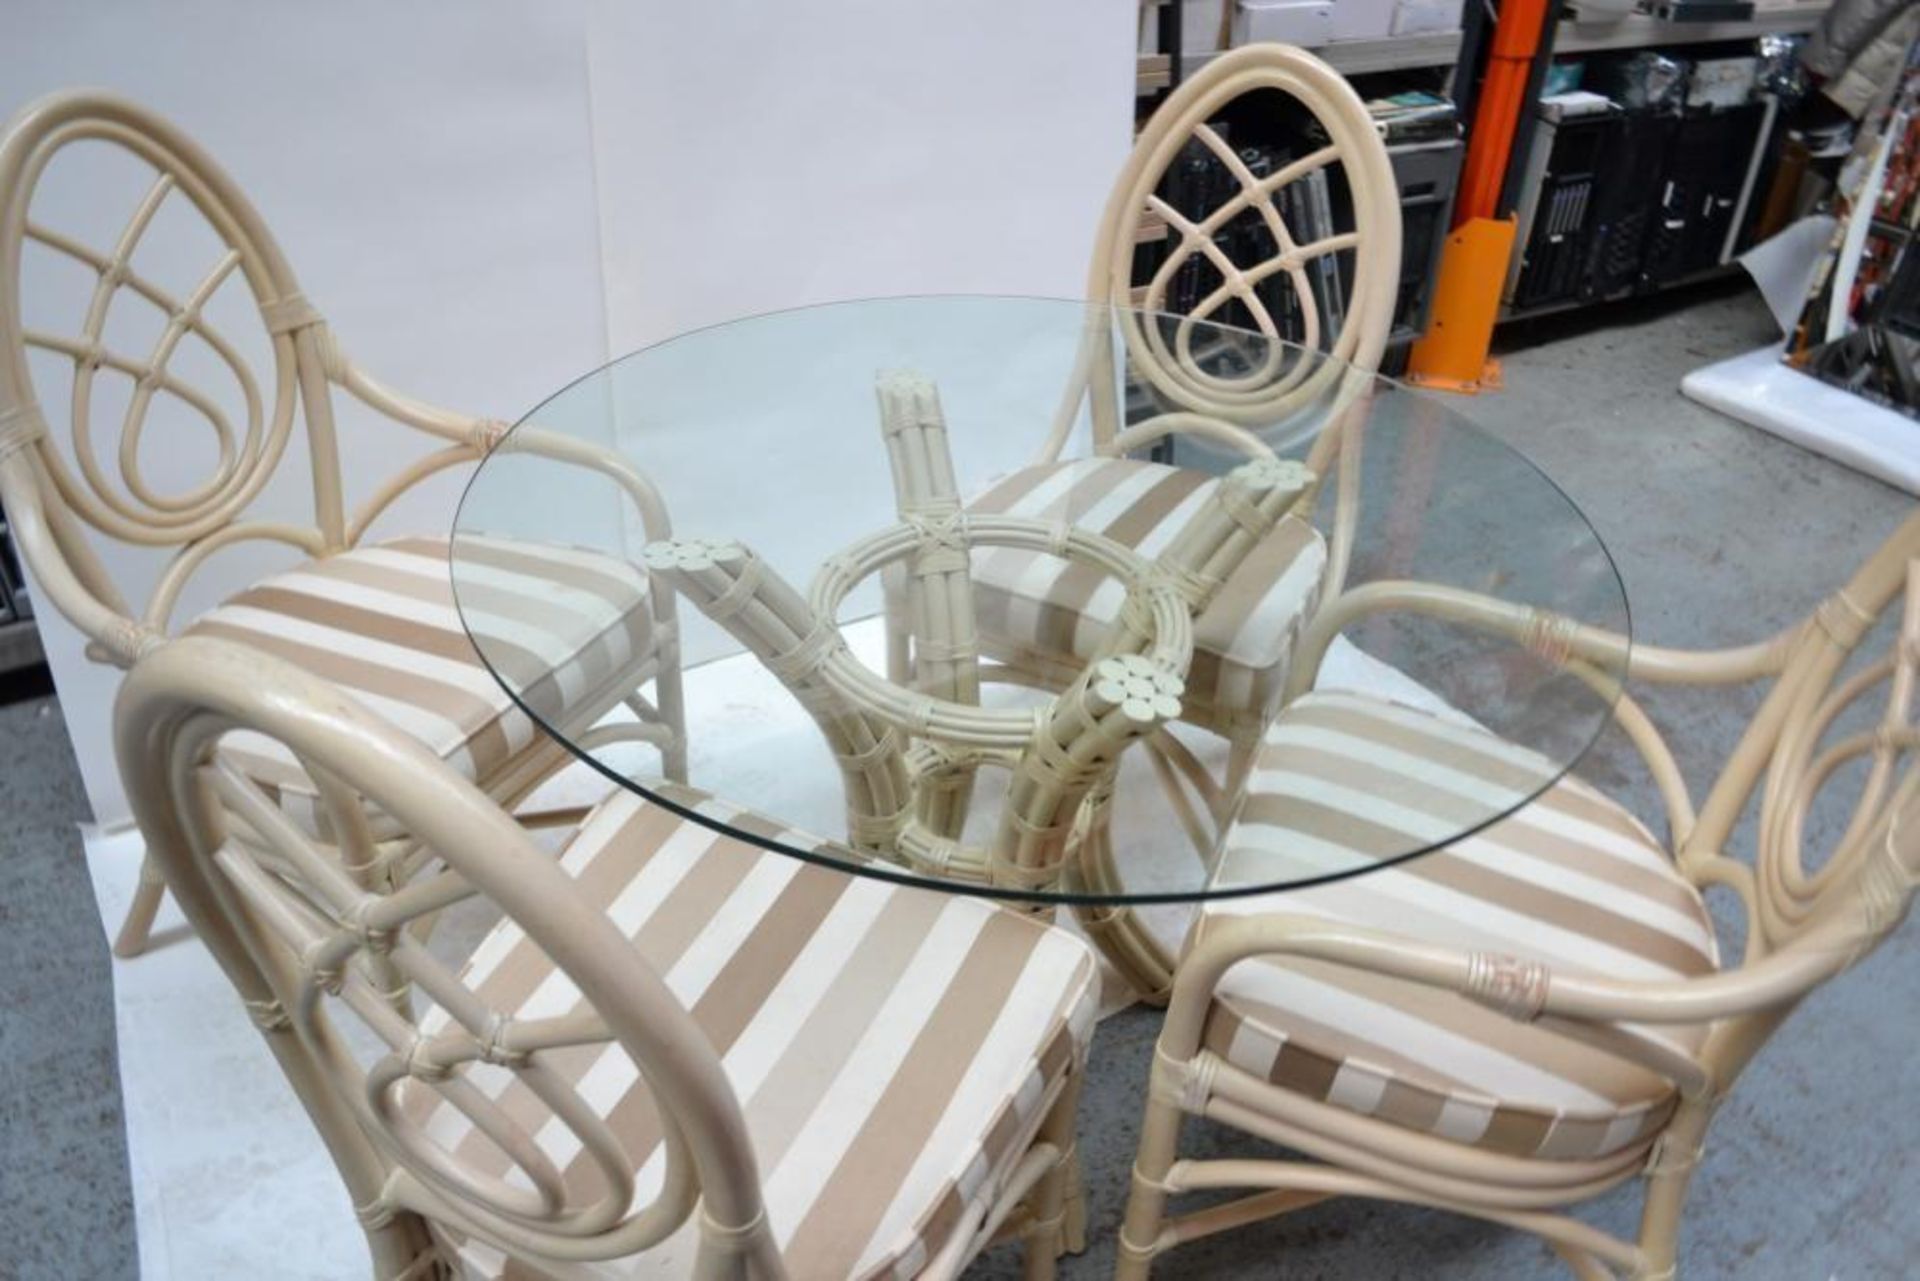 1 x Glass Topped Cane Table with 4 Chairs - Pre-owned In Good Condition - AE010 - CL007 - - Image 6 of 13